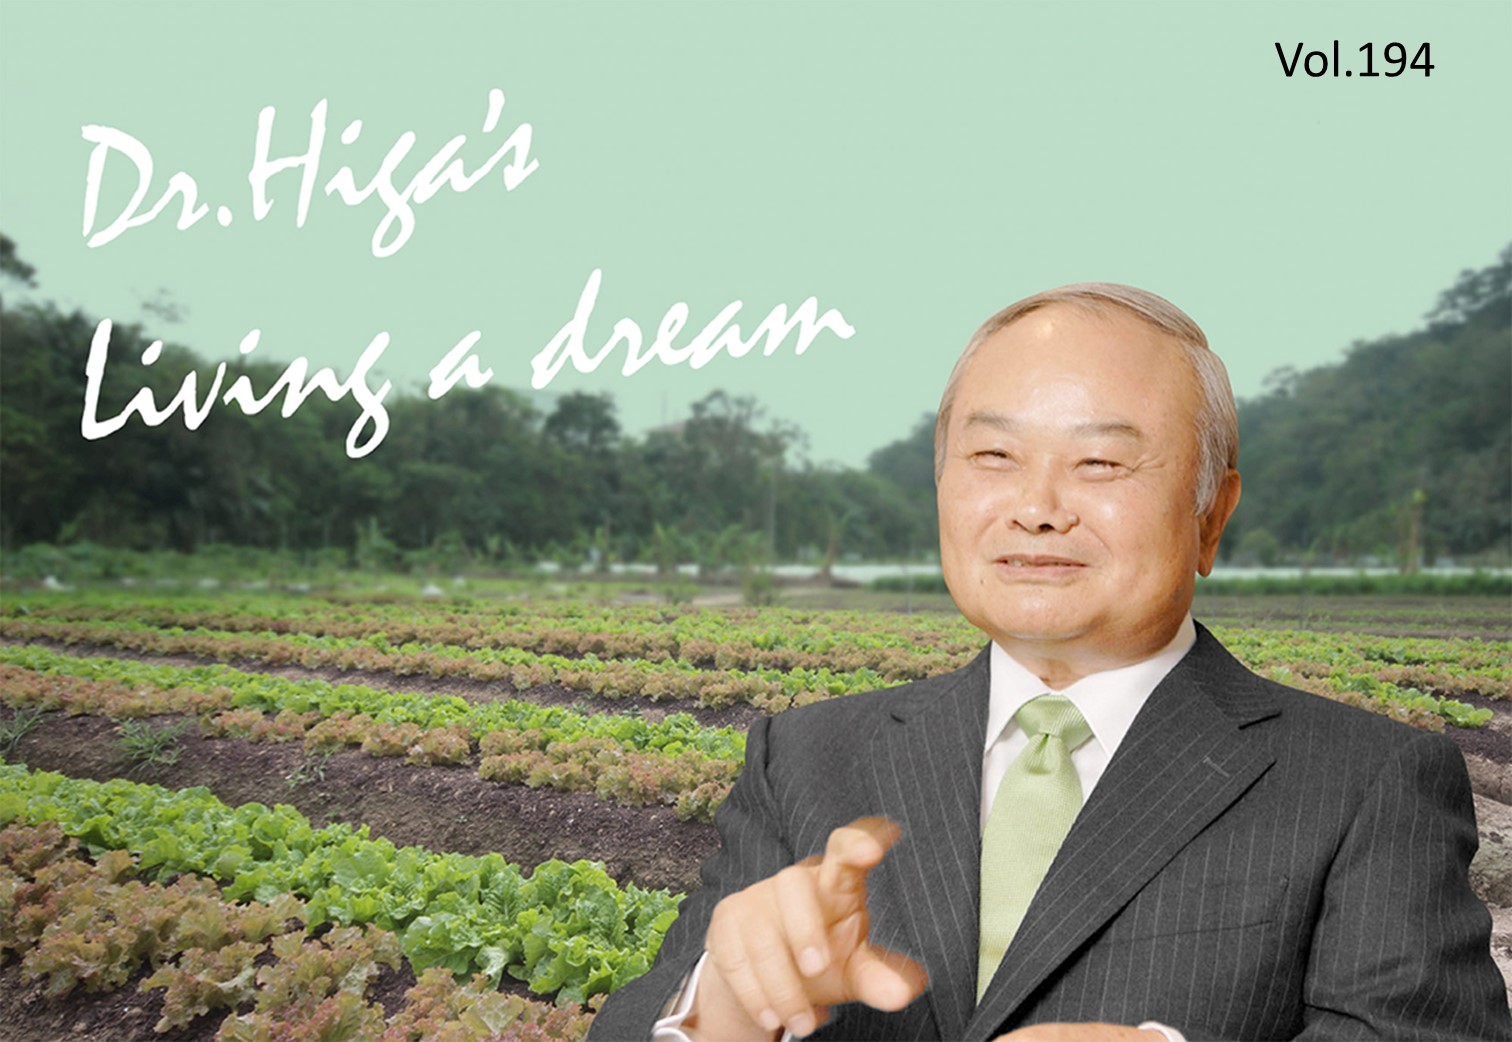 Dr. Higa's "Living a Dream": the latest article #194 is up!!!